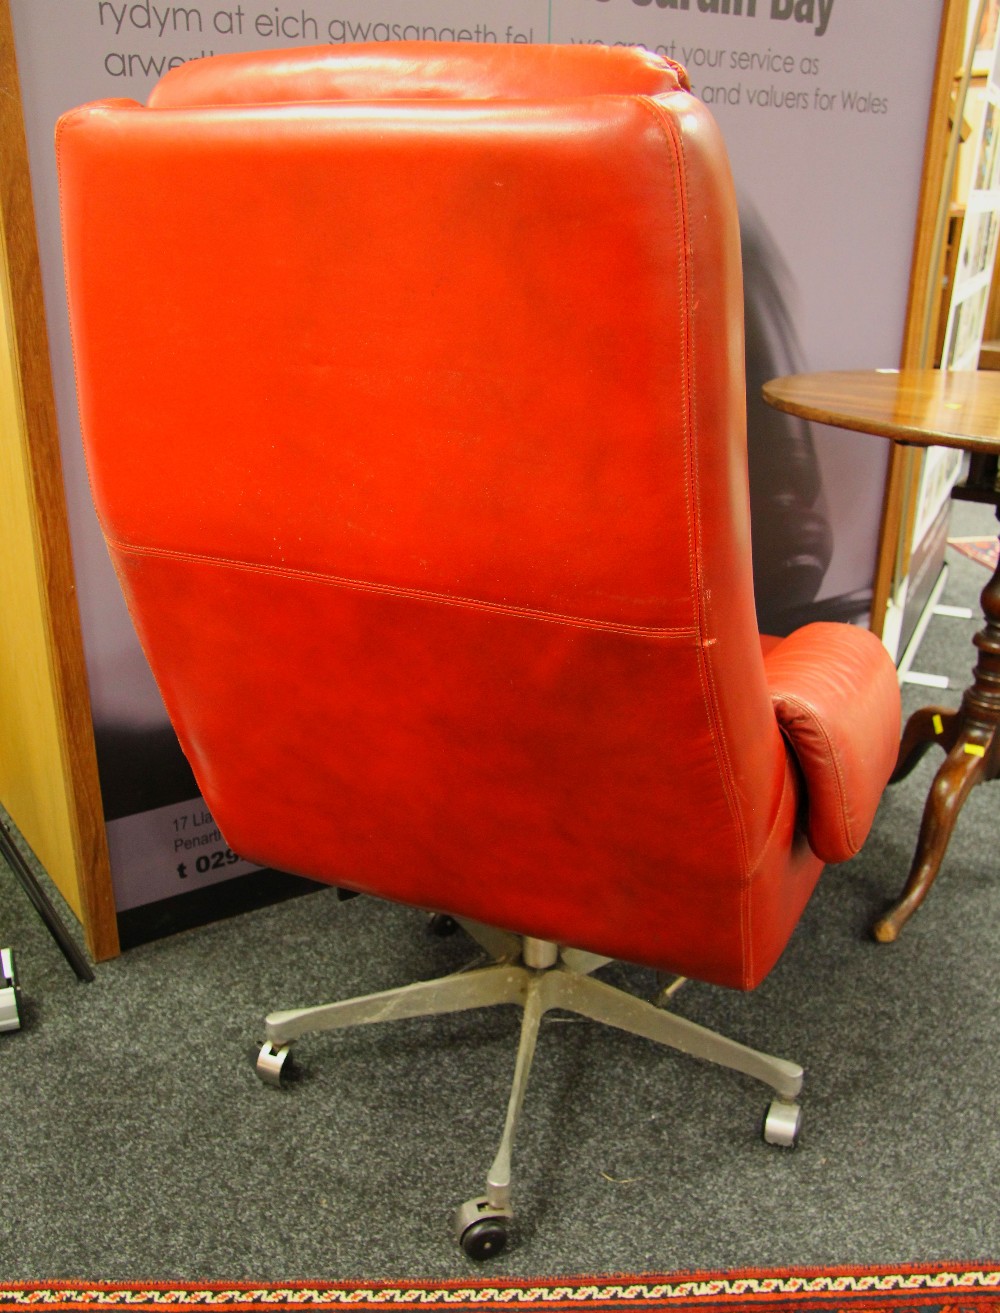 A MID-CENTURY NORWEGIAN LEATHER ARMCHAIR having swivel action over a chrome spoked base with castors - Image 3 of 3